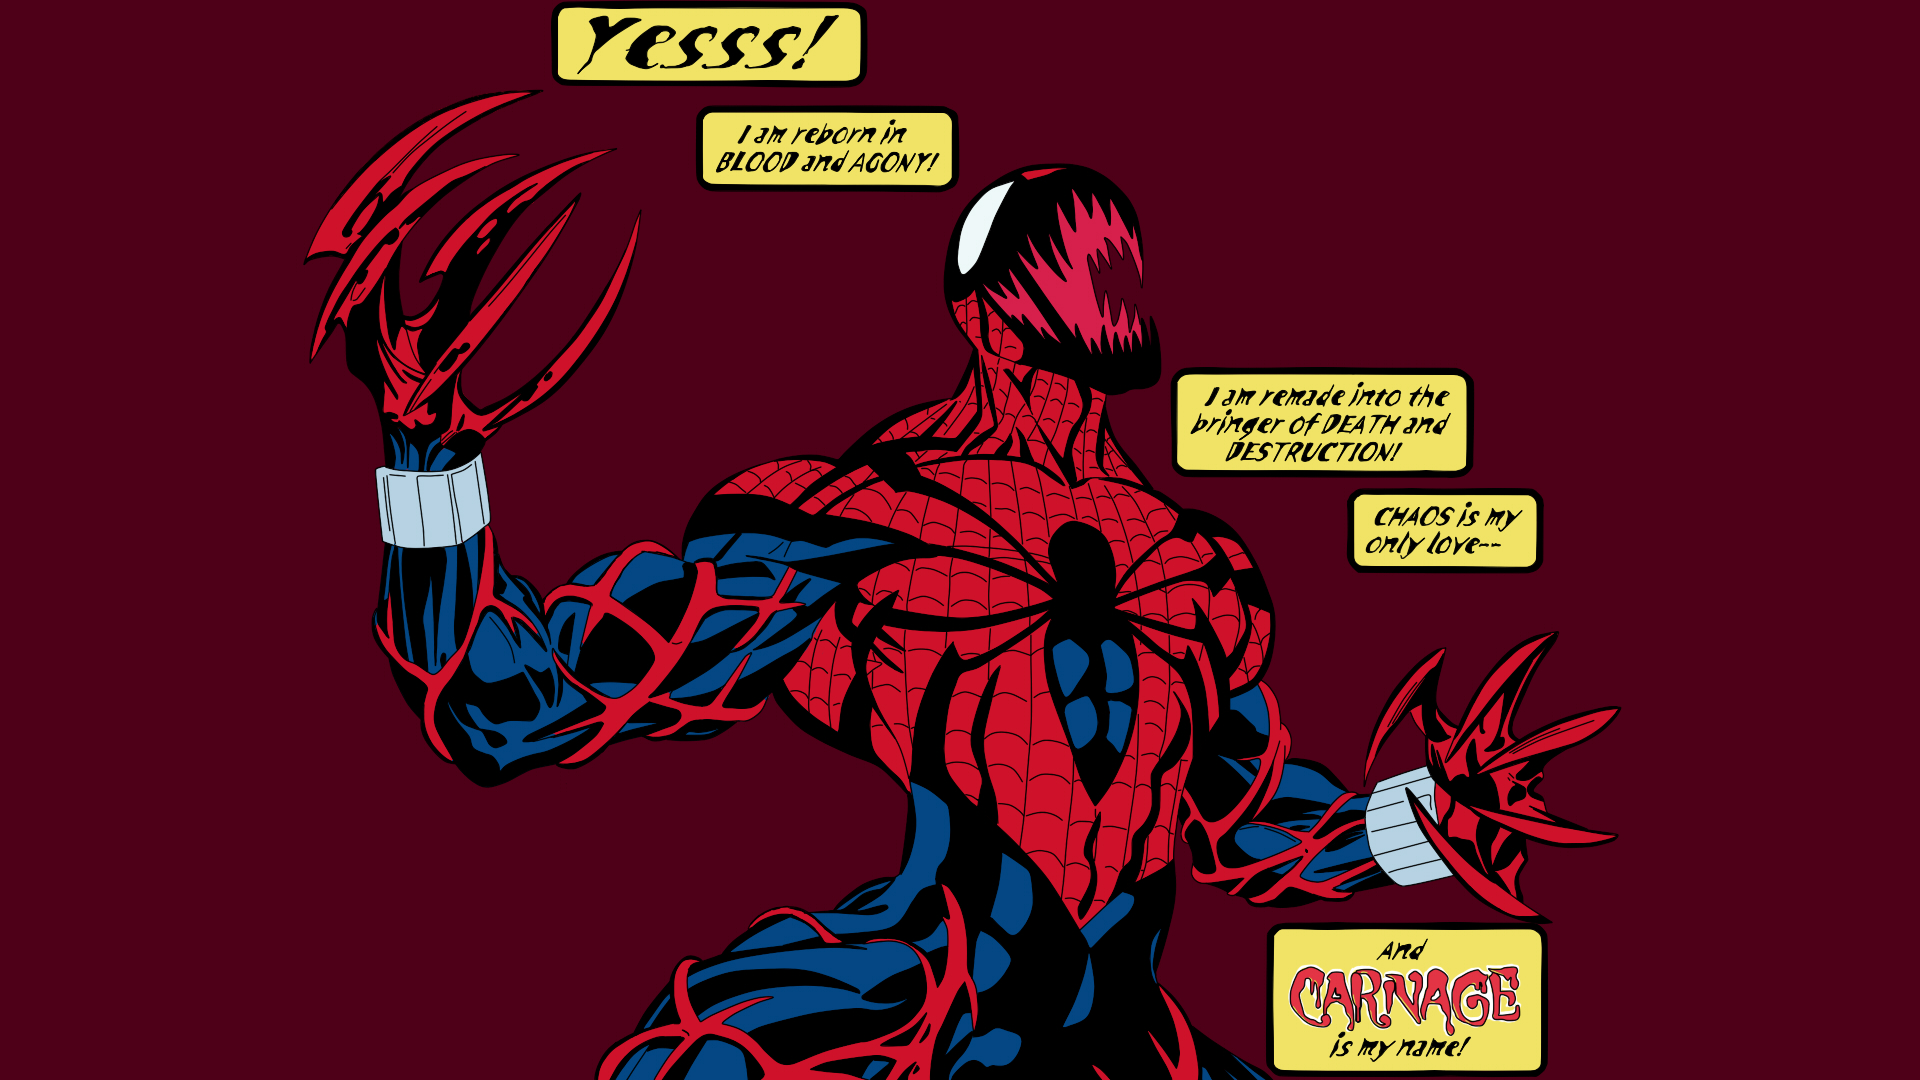 Spider-Carnage
From The Amazing Spider-man #410.

Traced and colored in Paint Tool SAI.
